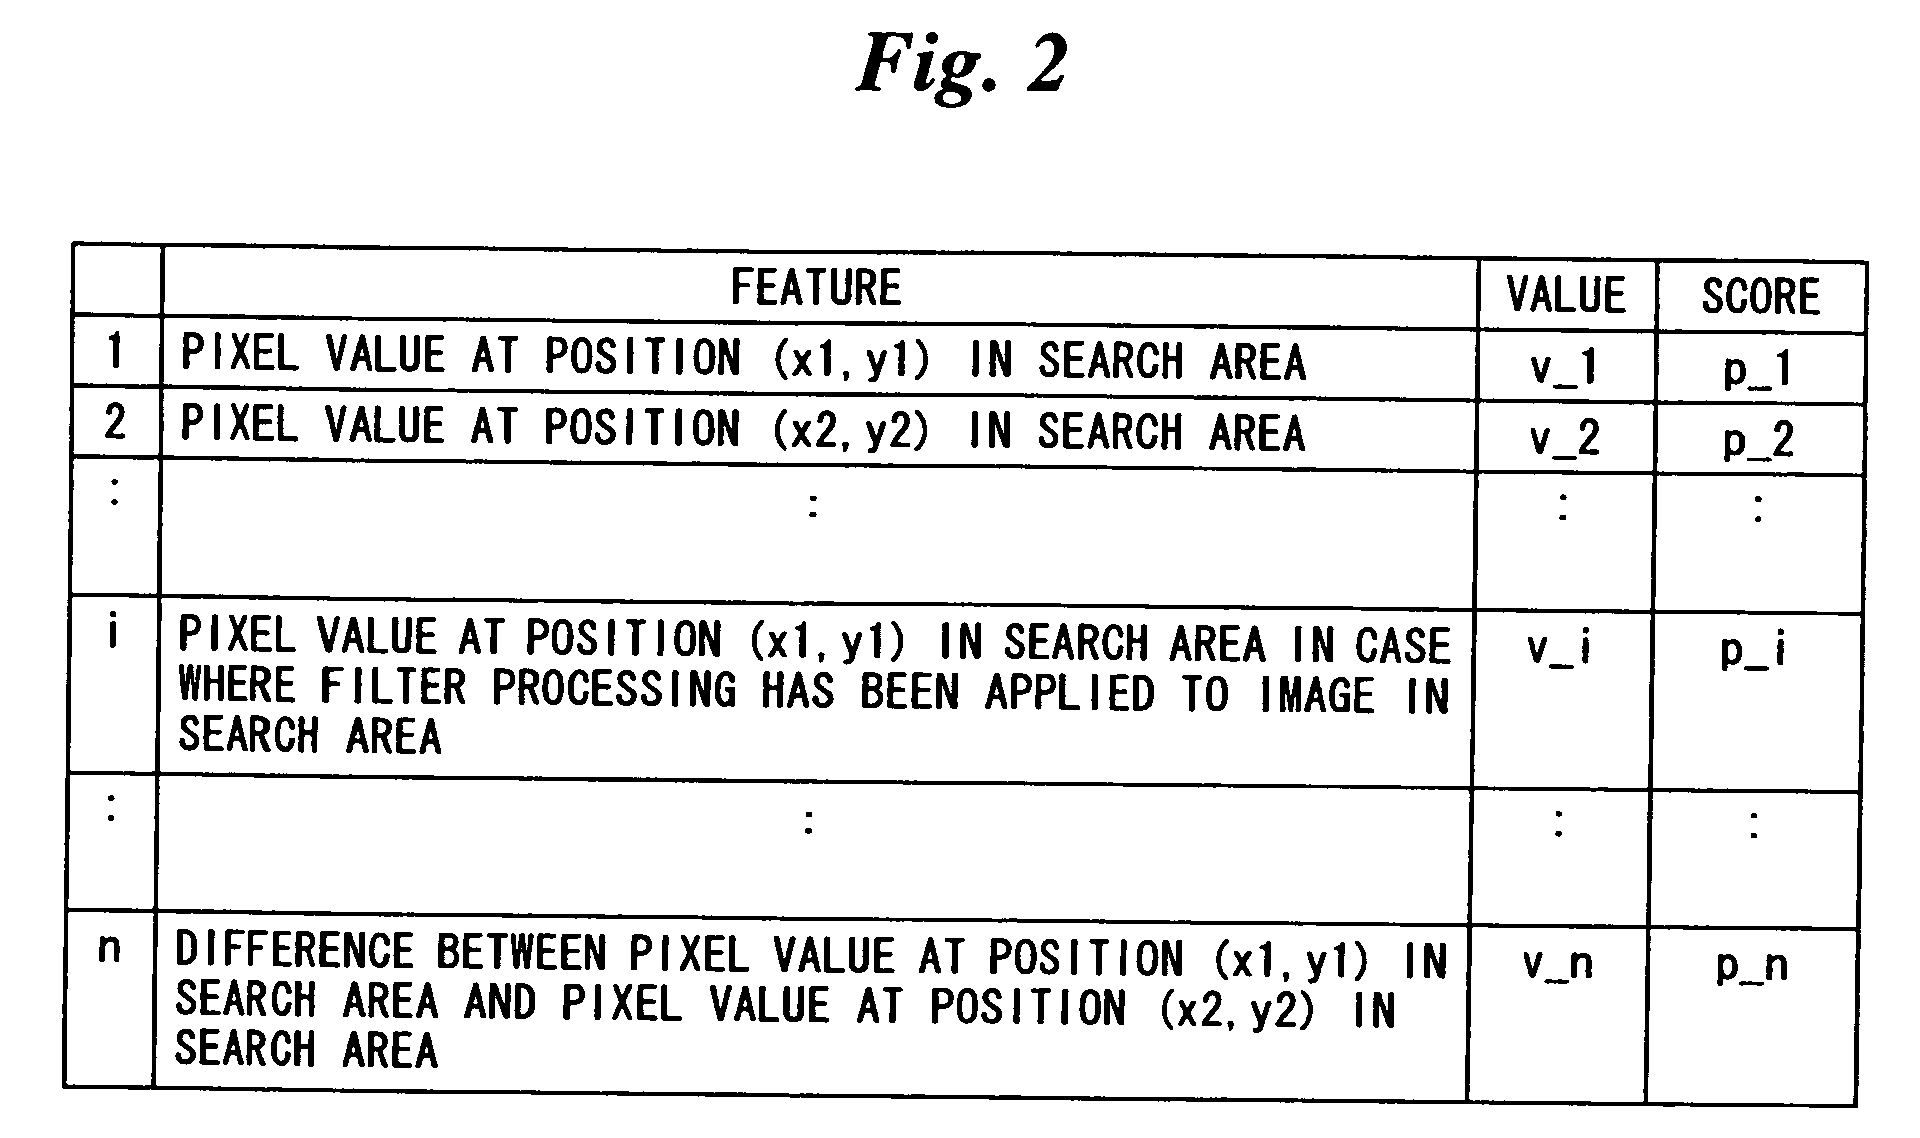 Image search apparatus for images to be detected, and method of controlling same